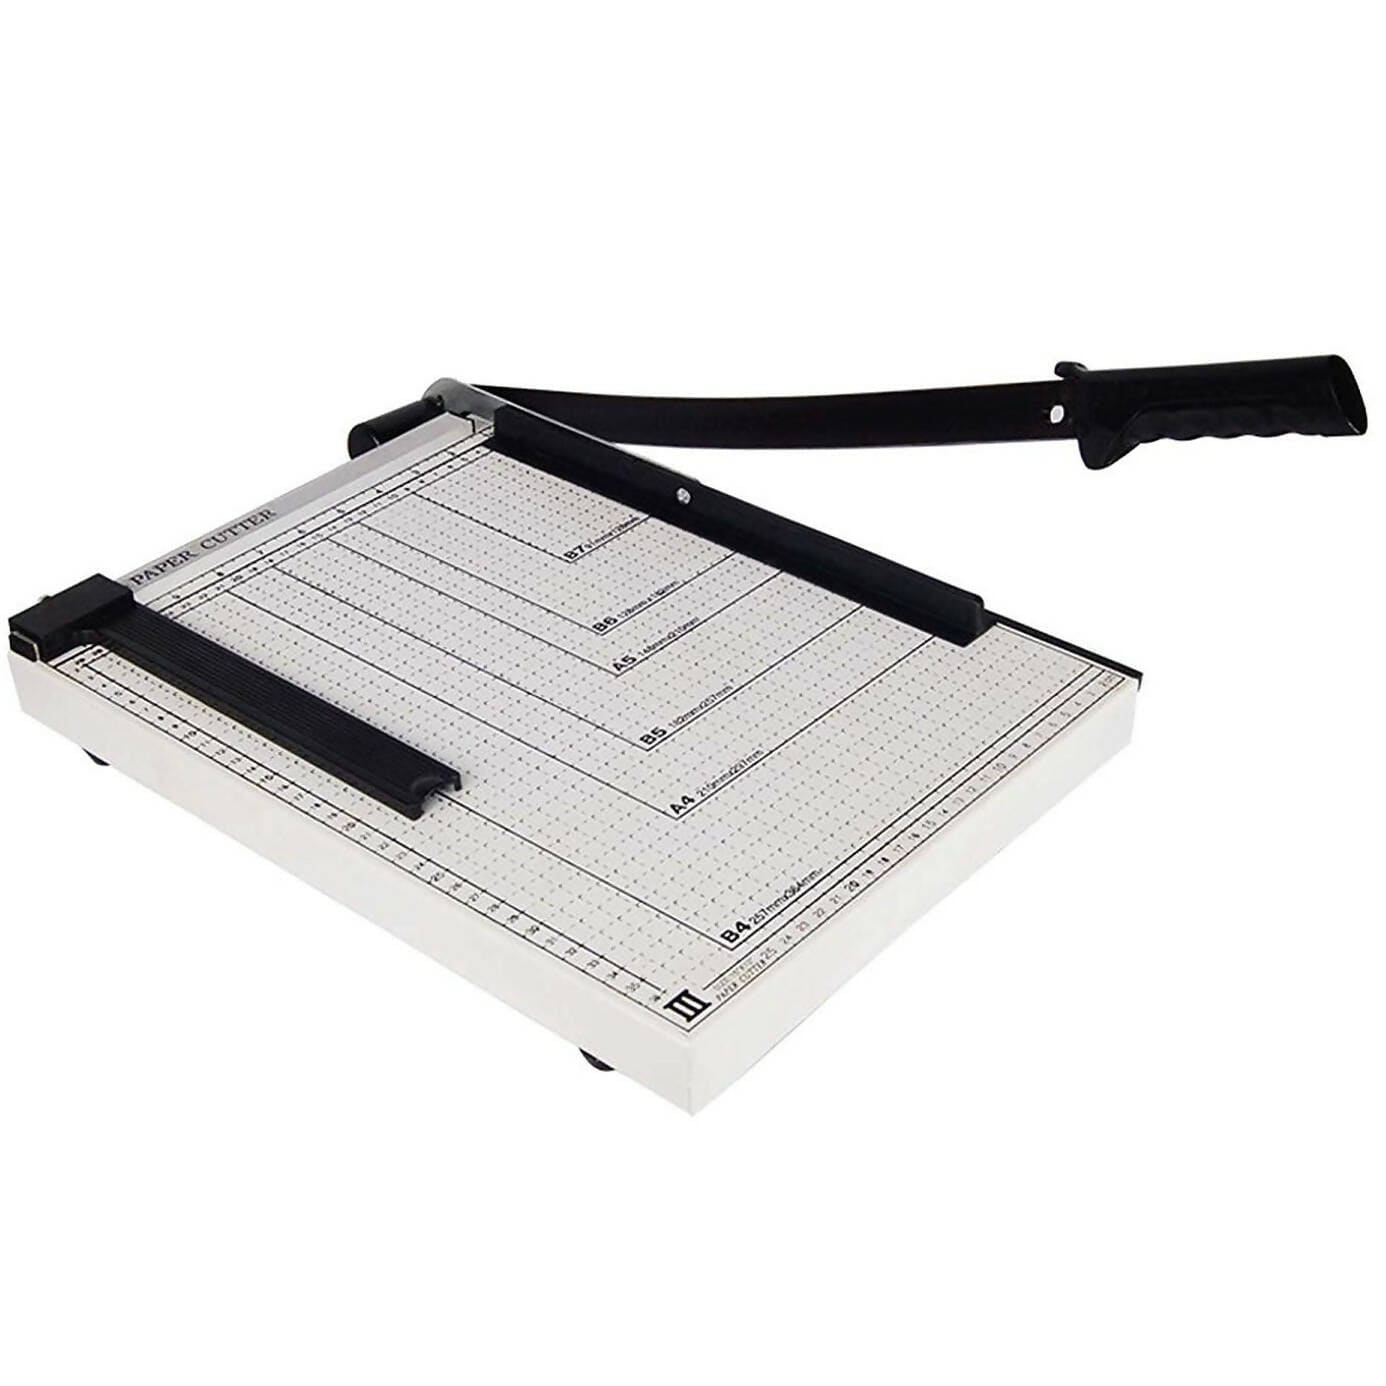 Provideolb Paper Craft Tools Paper Cutter Trimmer A3 Guillotine Paper Cutter for Regular and Photo Paper - A3829